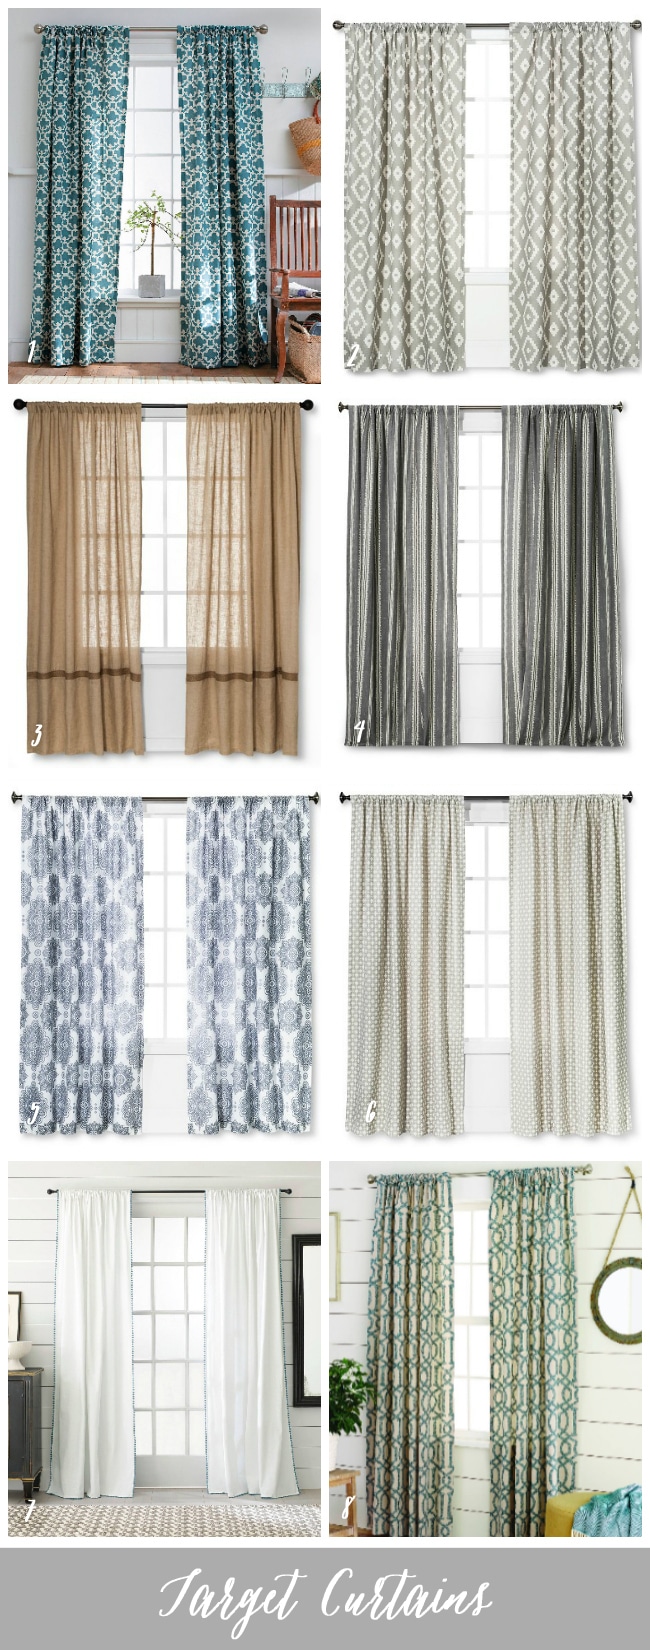 The Question of Curtain Panels